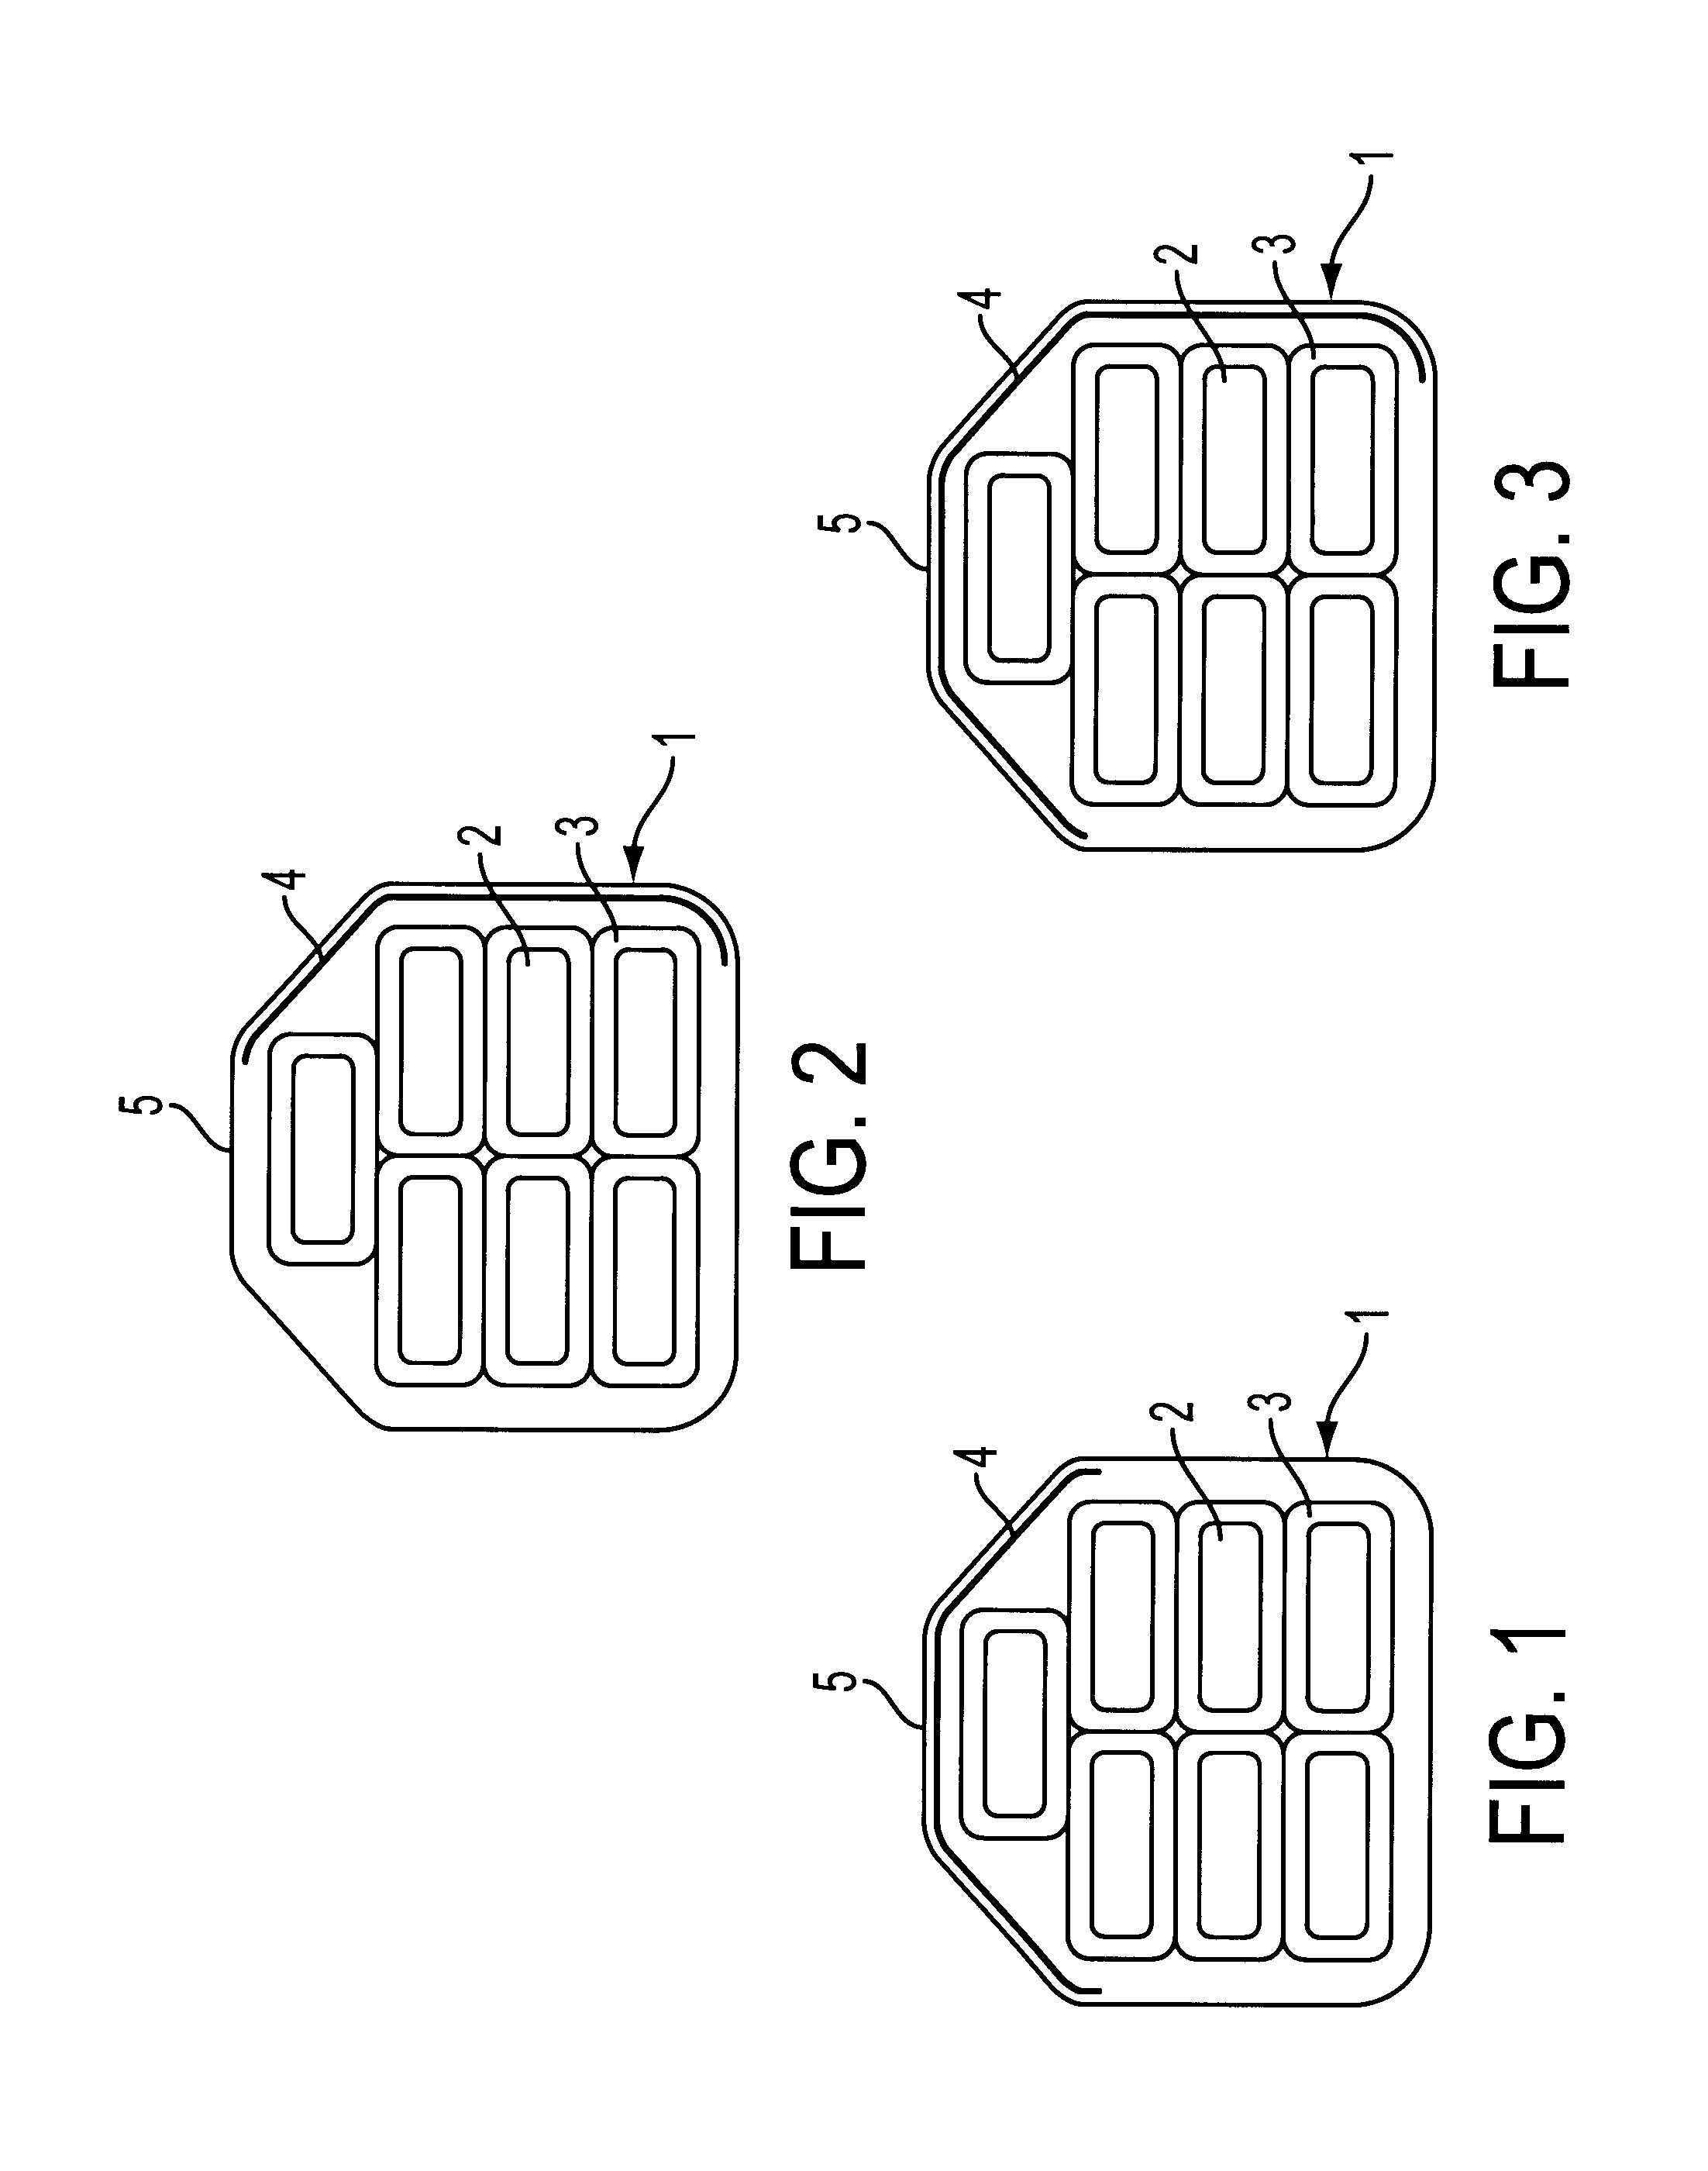 Multiple parallel conductor for electrical machines and devices